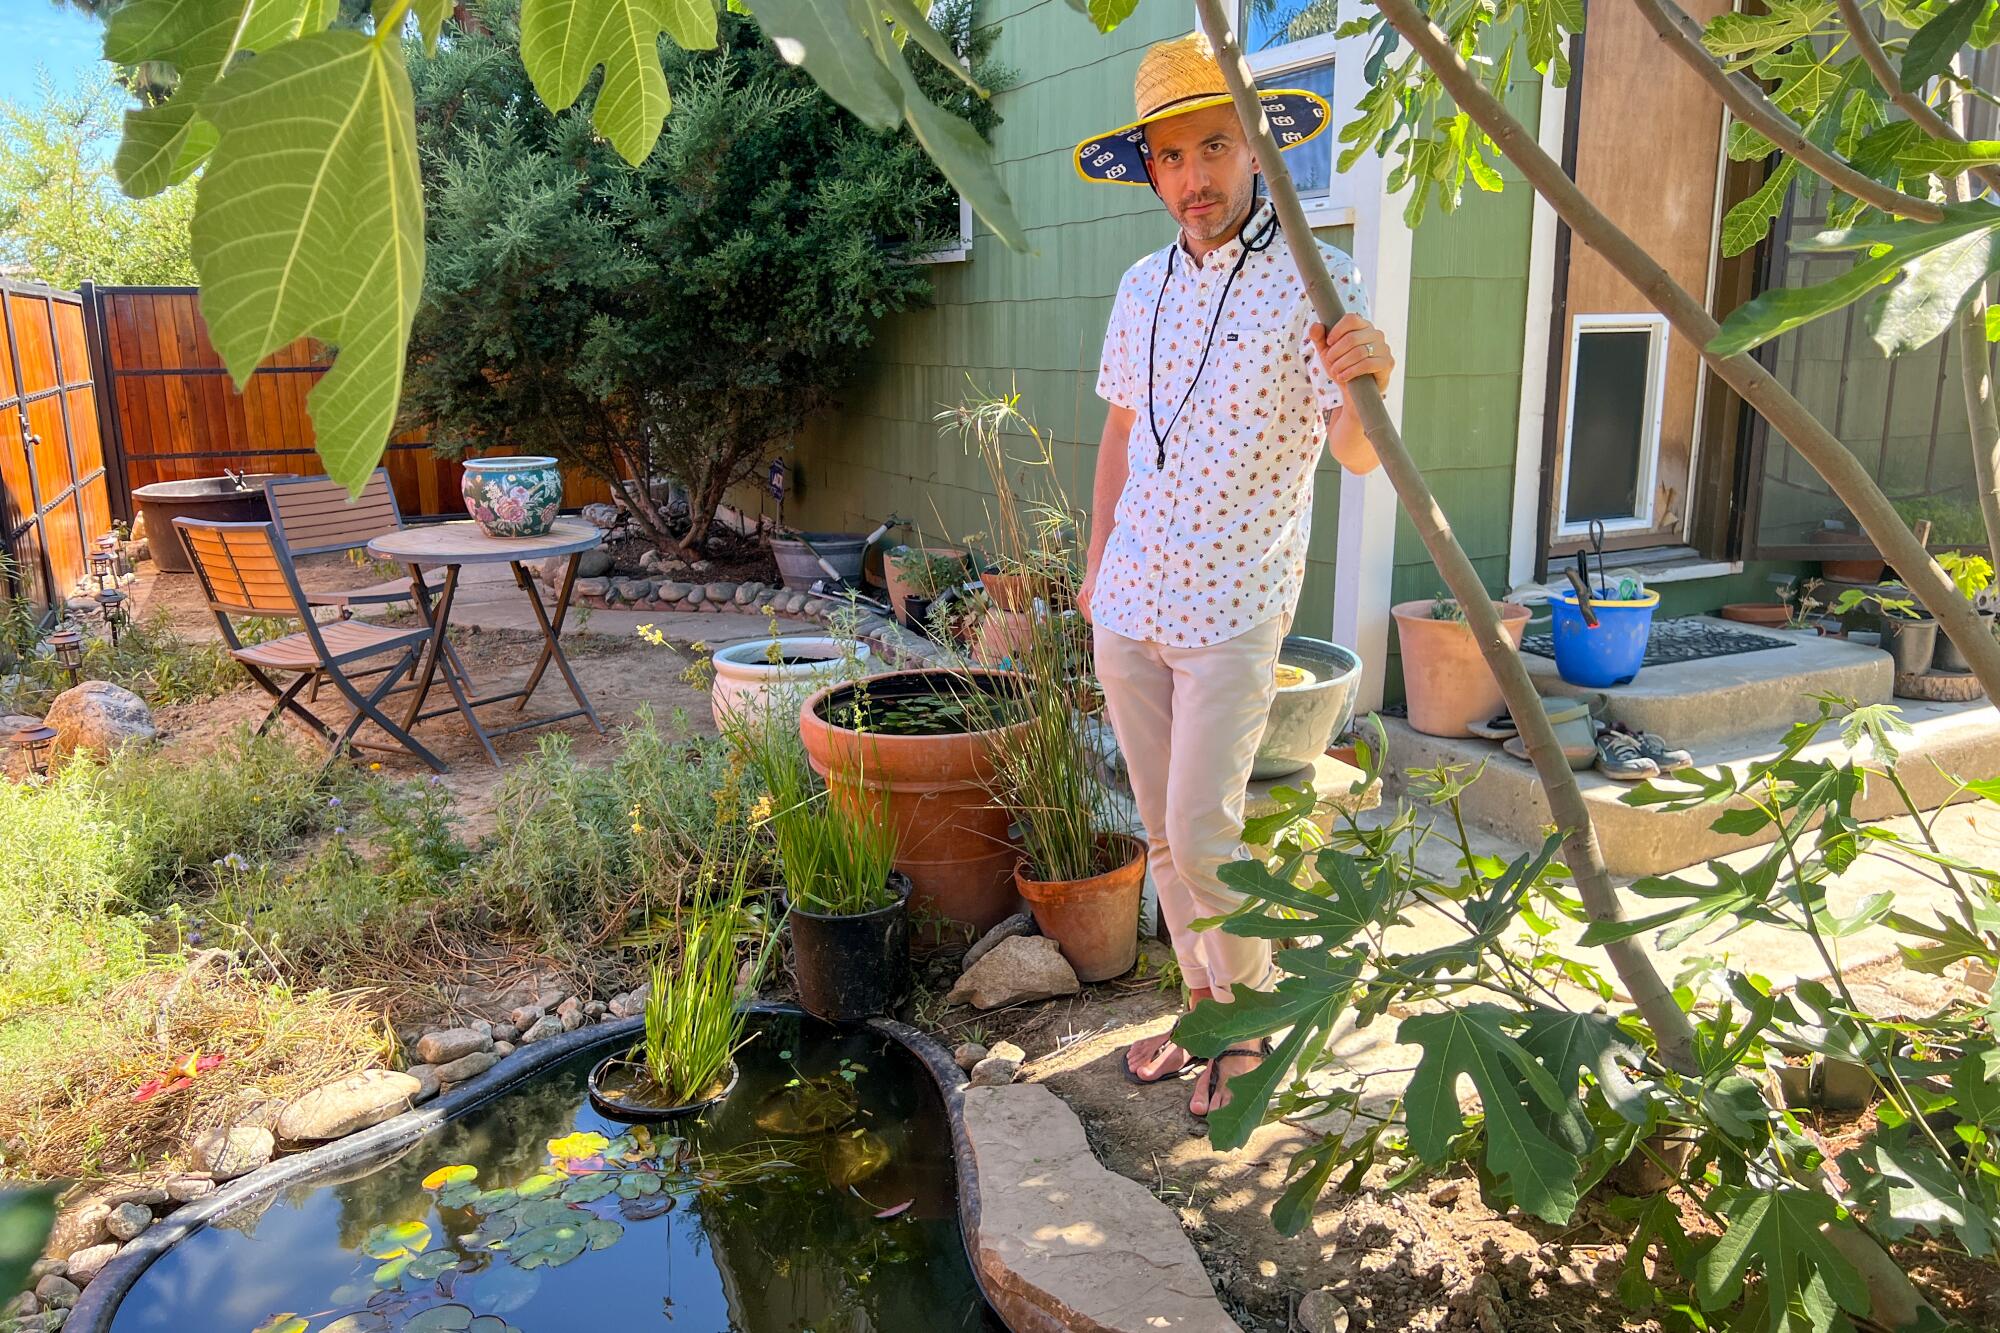 Andrew Chaves, a slender man in a sun hat and sandals, stands next to the small pond he installed.